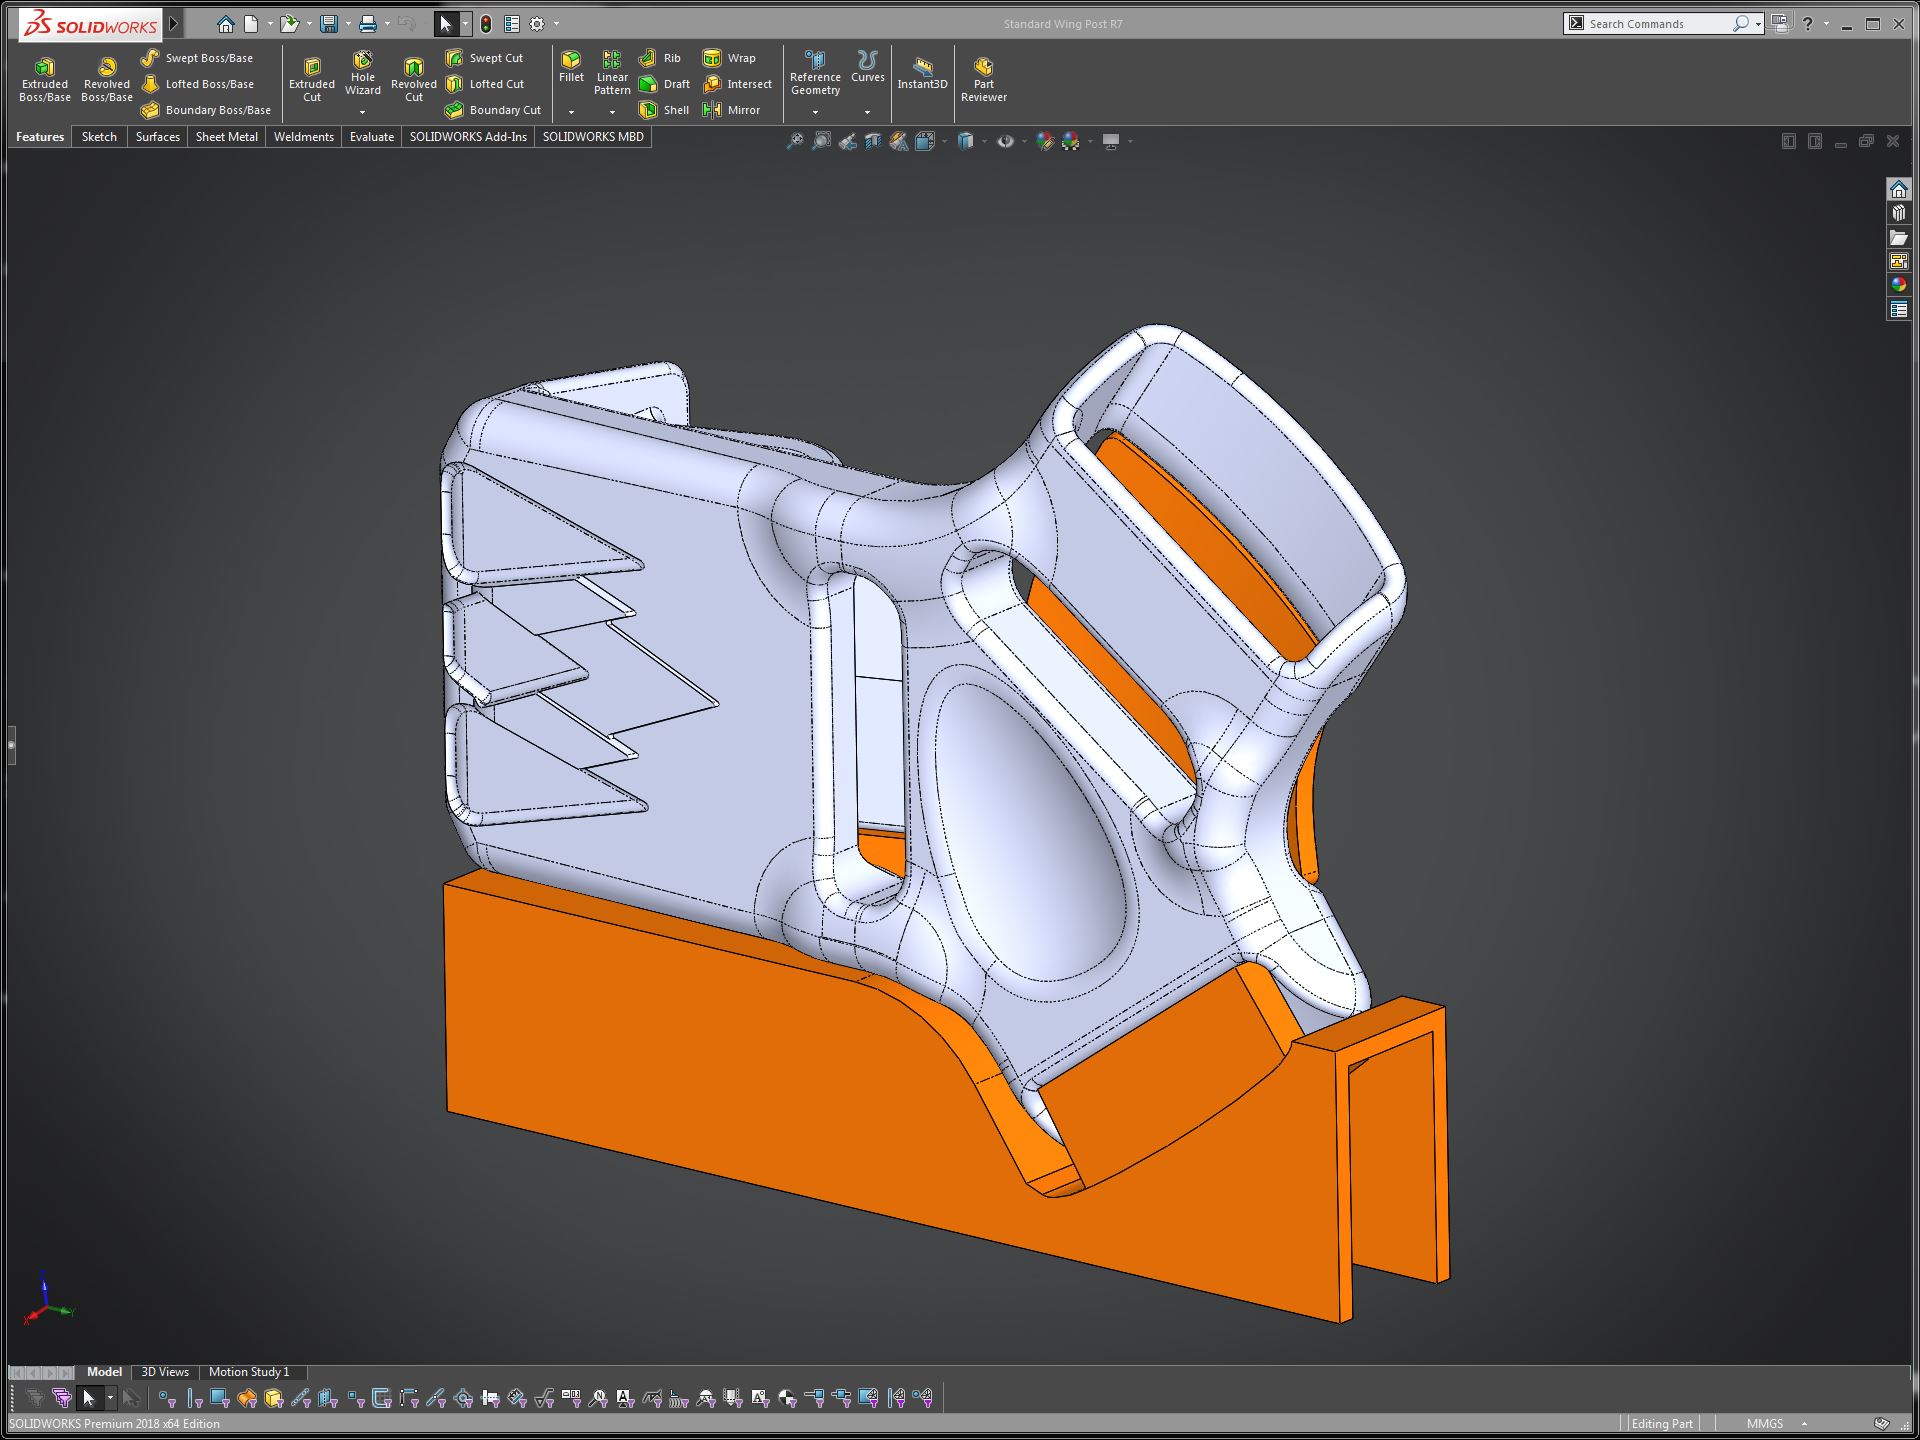 Luna Sandal Wing Post Manual Supports Modeled In SolidWorks